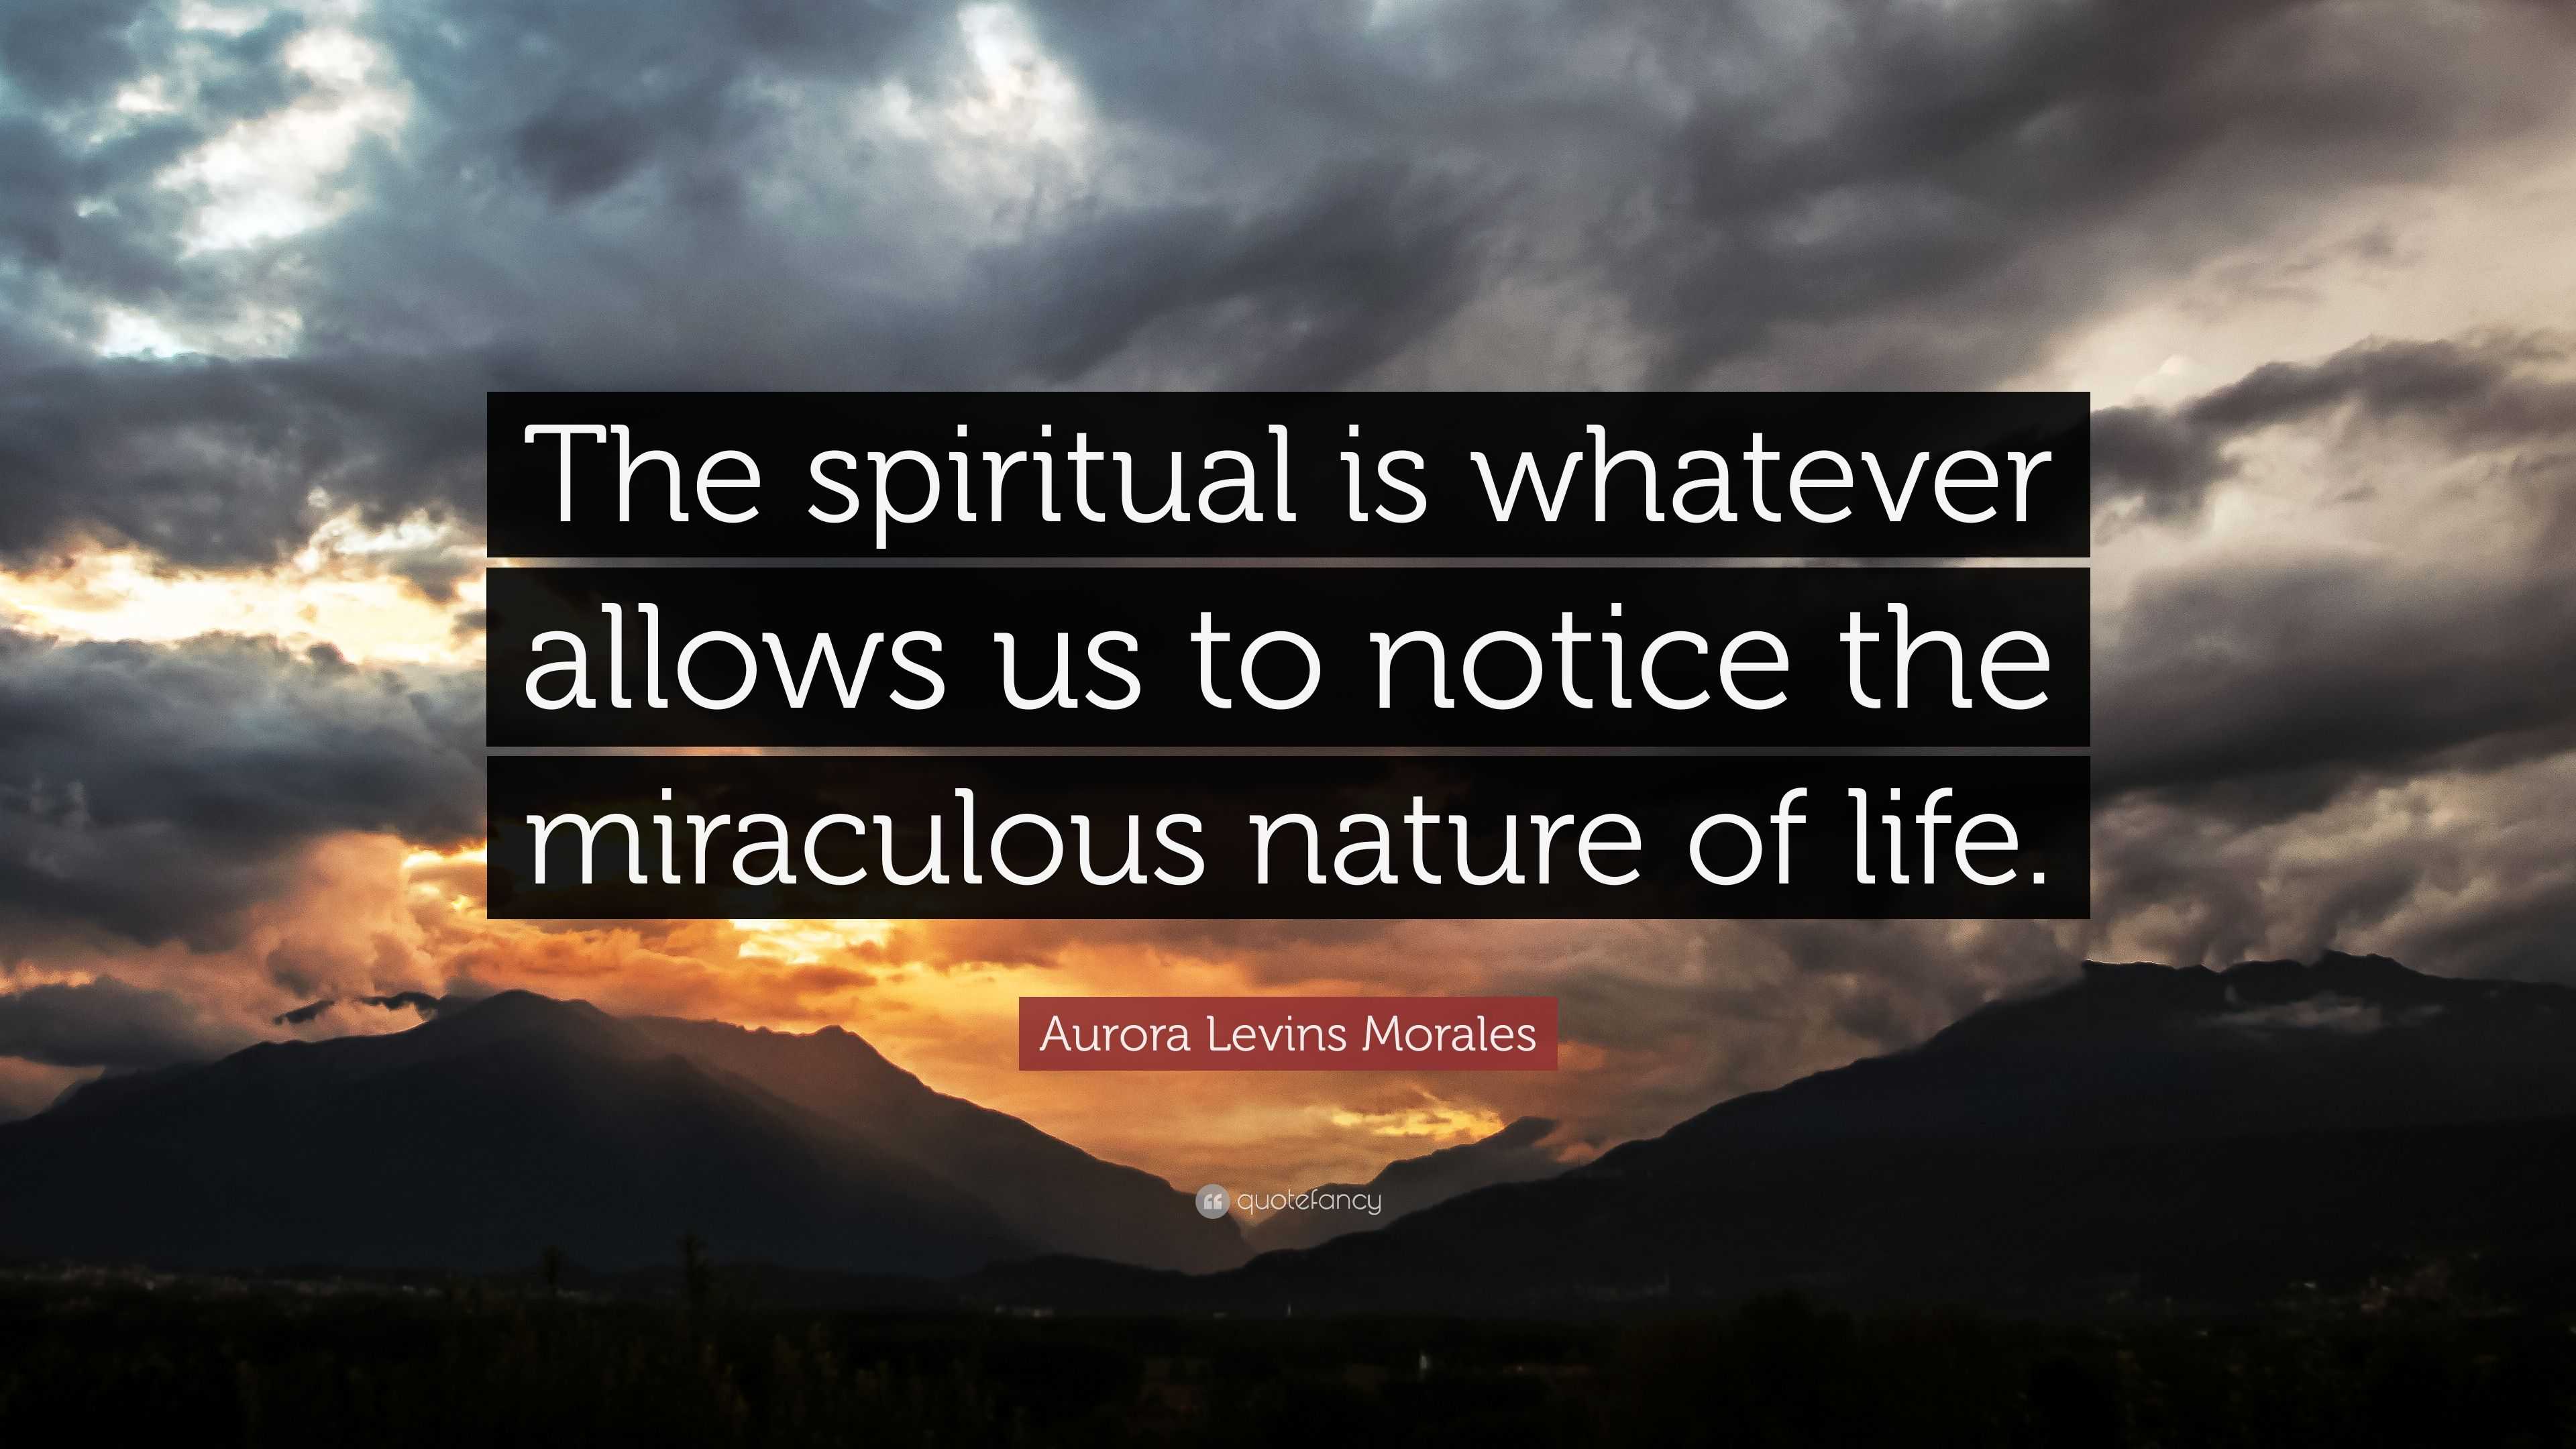 Aurora Levins Morales Quote: “The spiritual is whatever allows us to ...